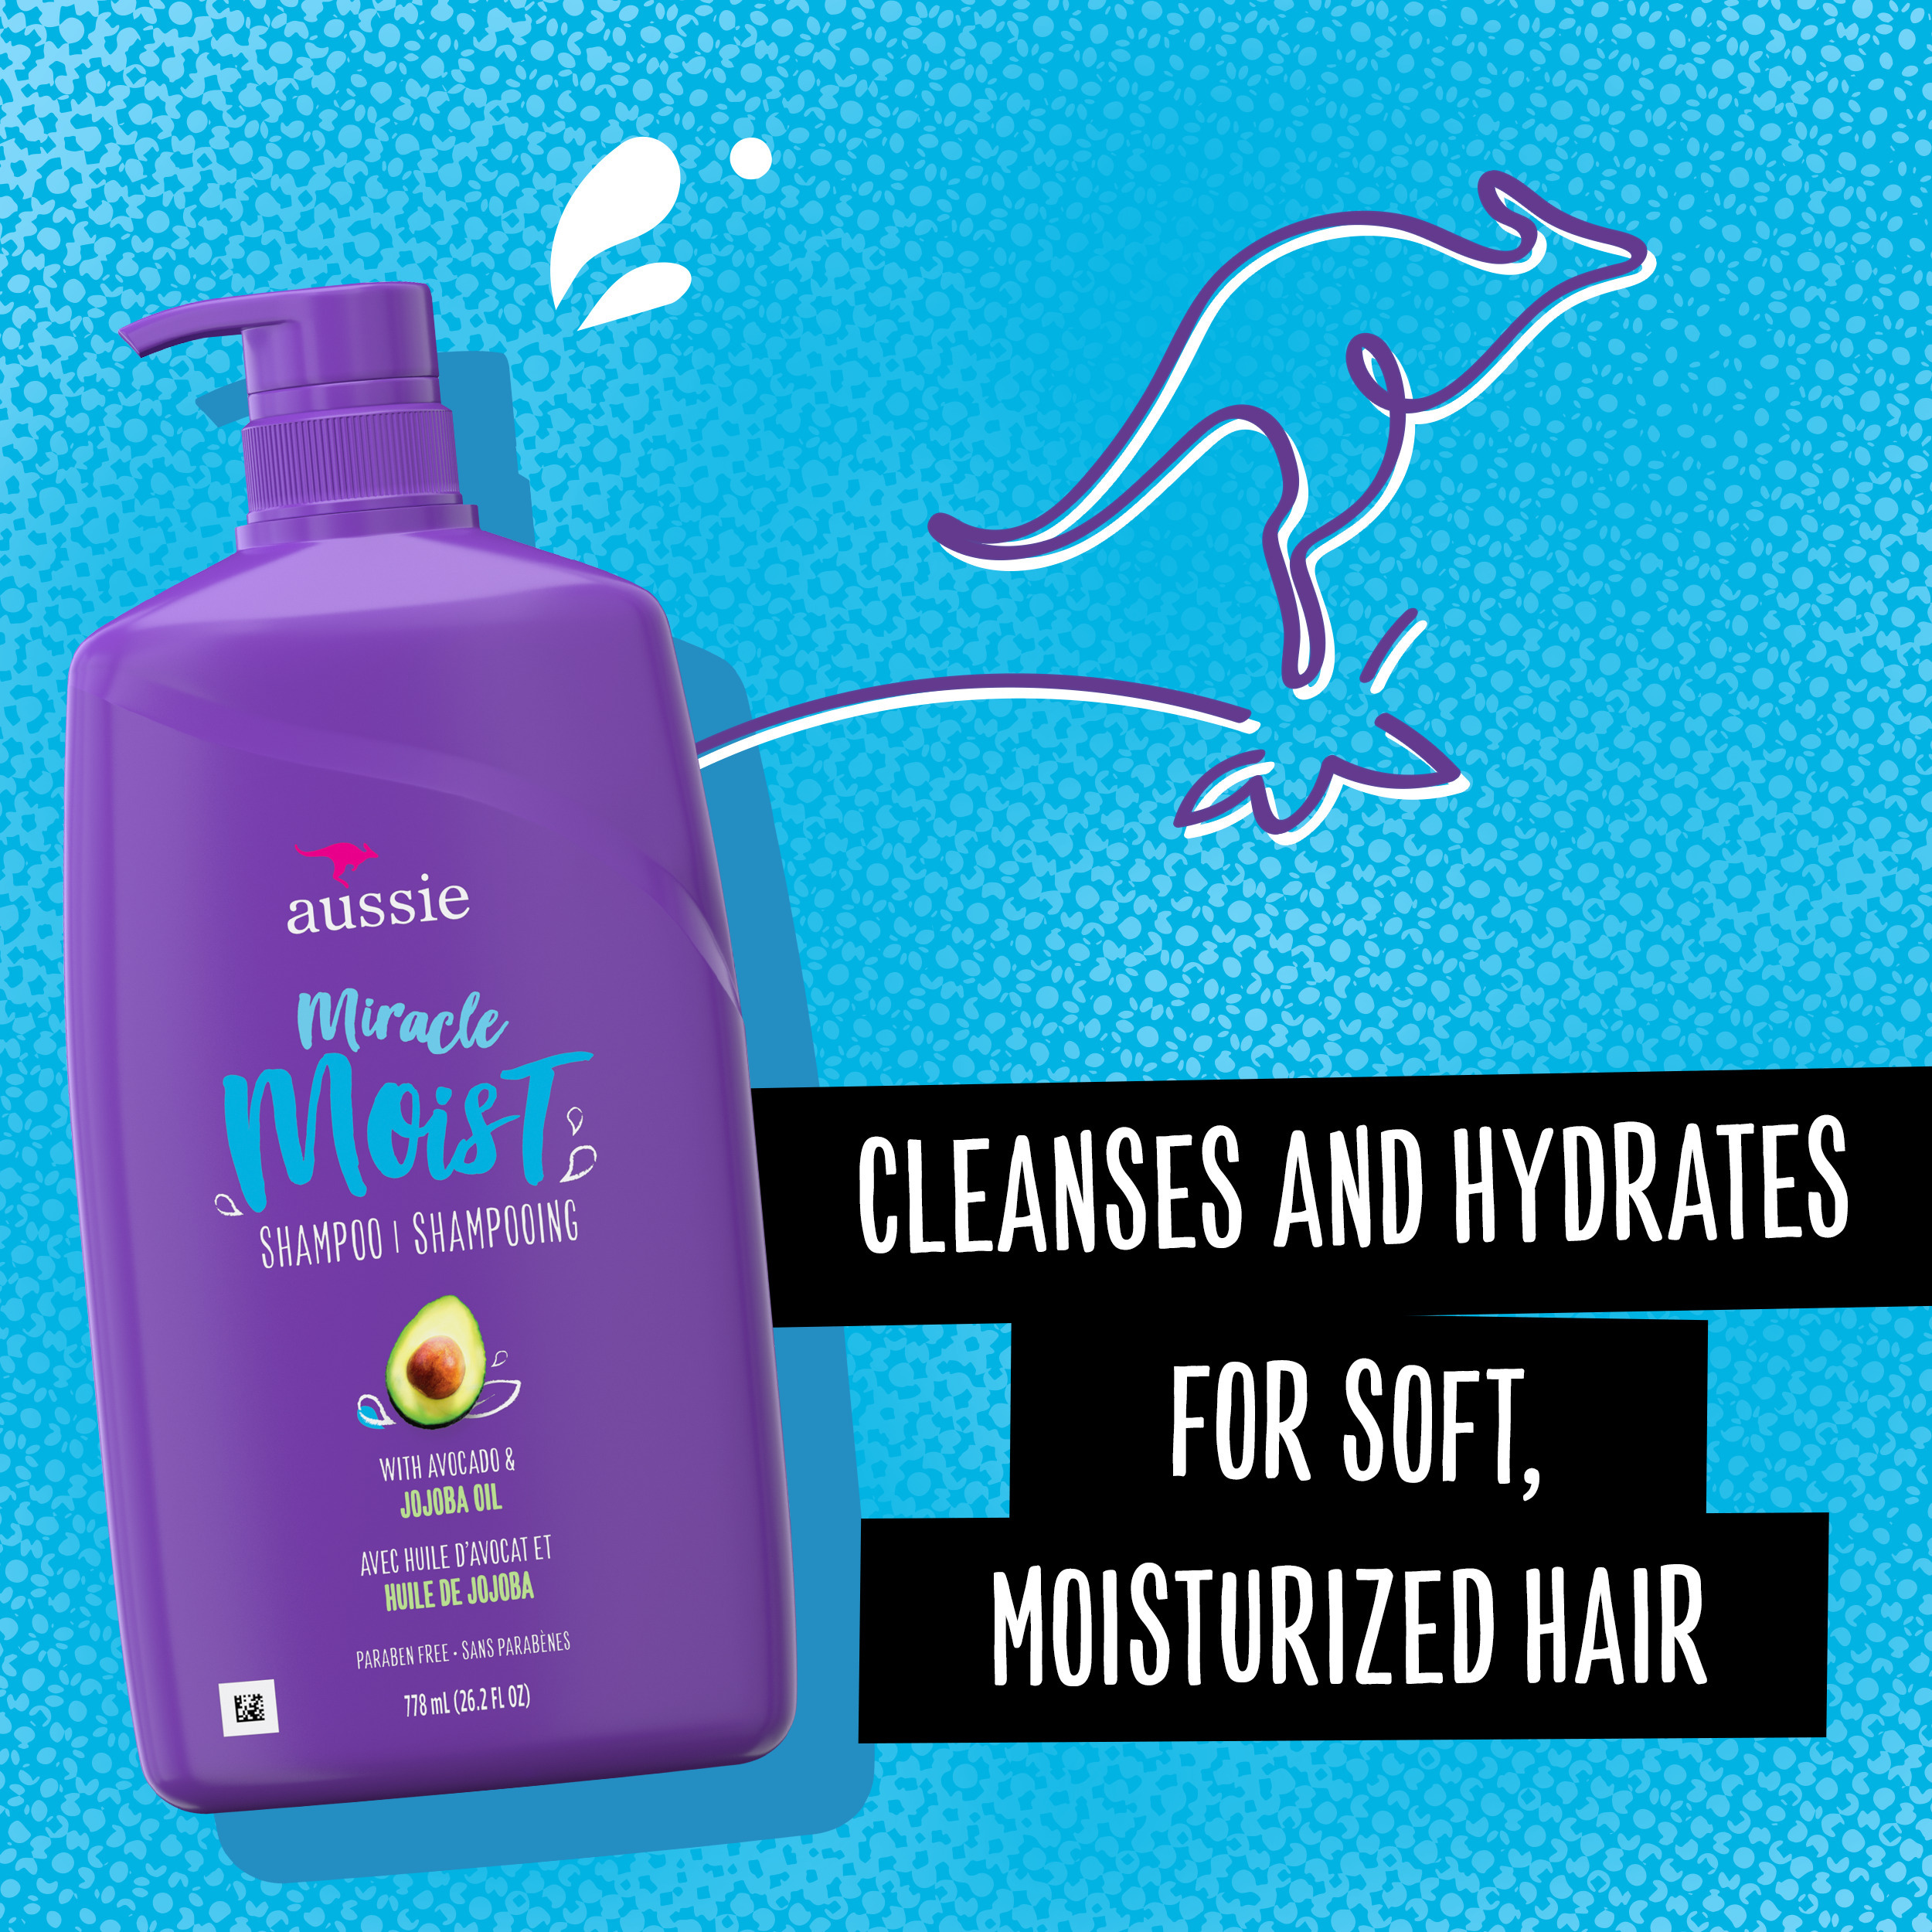 Aussie Miracle Moist Shampoo with Avocado, Paraben Free,  For All Hair Types 26.2 fl oz - image 2 of 9